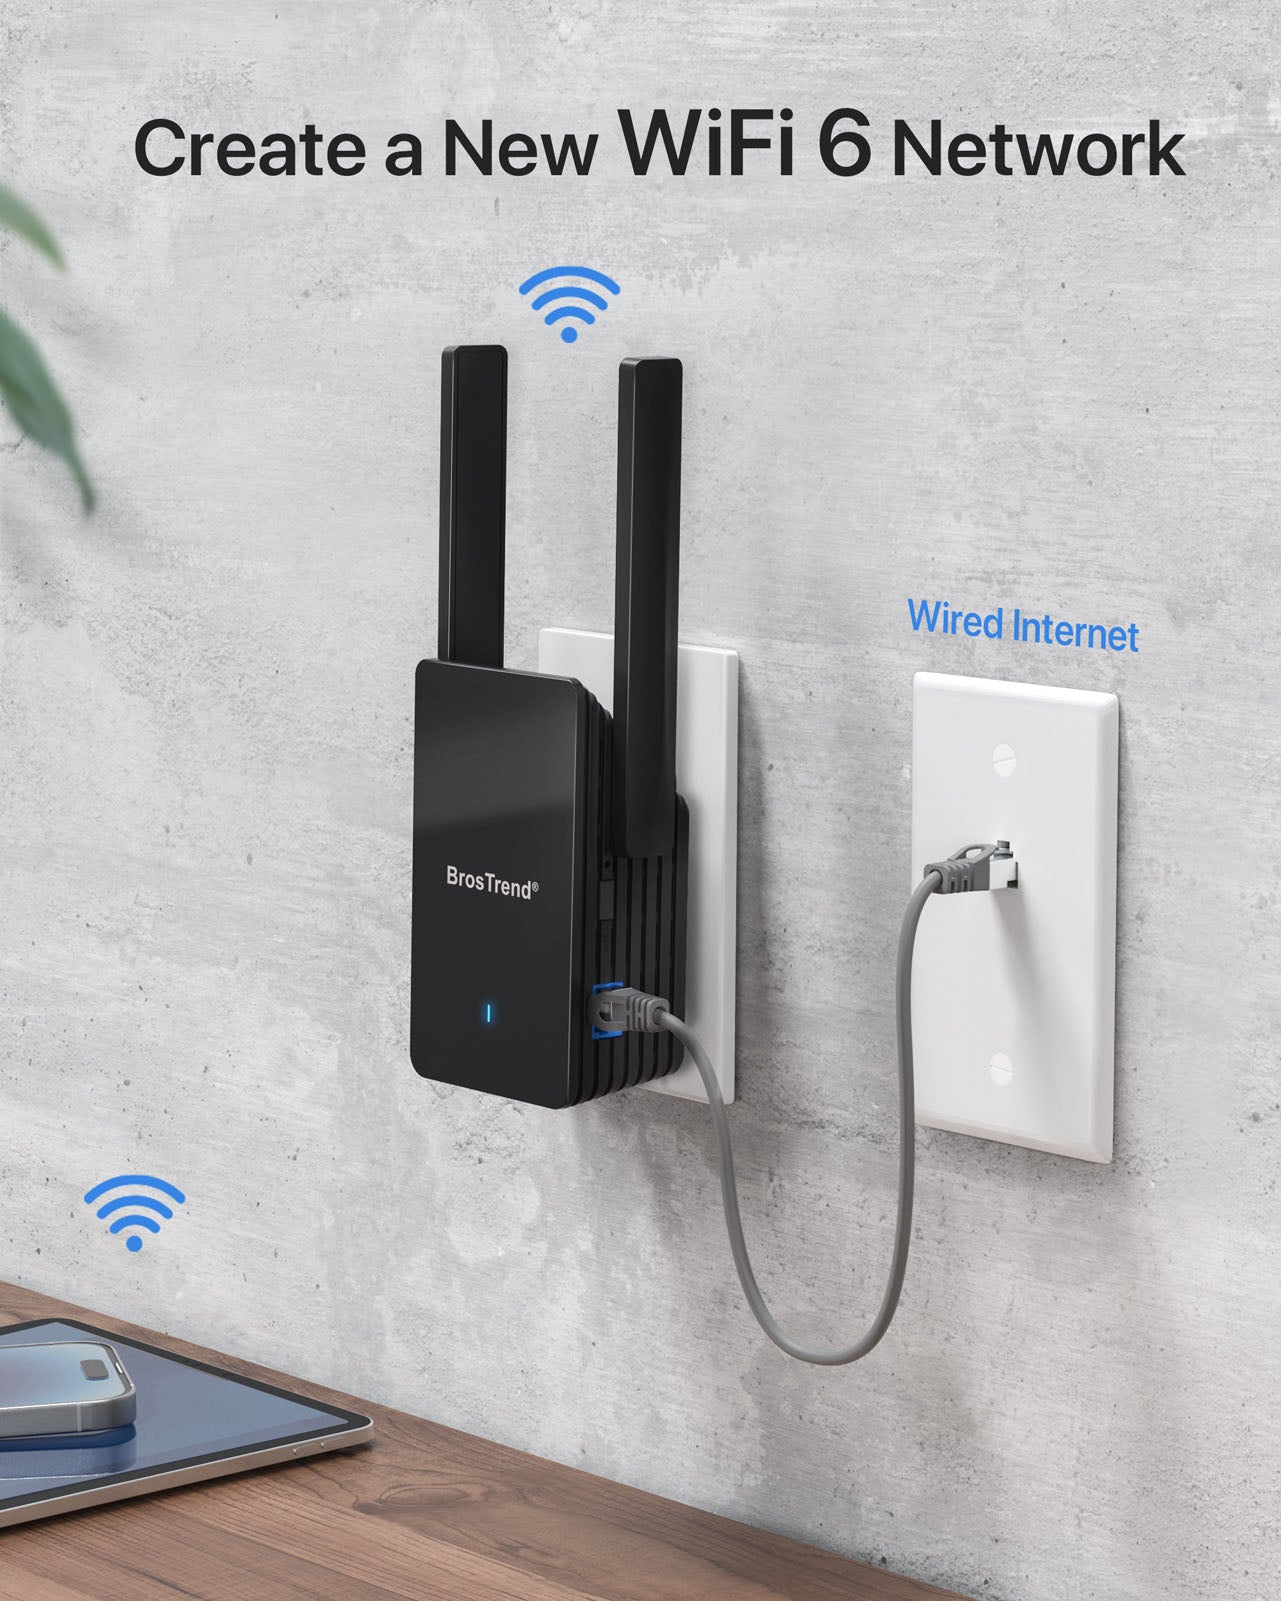 Connect AX3000 WiFi 6 Access Point to an Internet-Enabled Ethernet Port or a LAN Port of a Router and Turn Wired Network to High-Speed WiFi